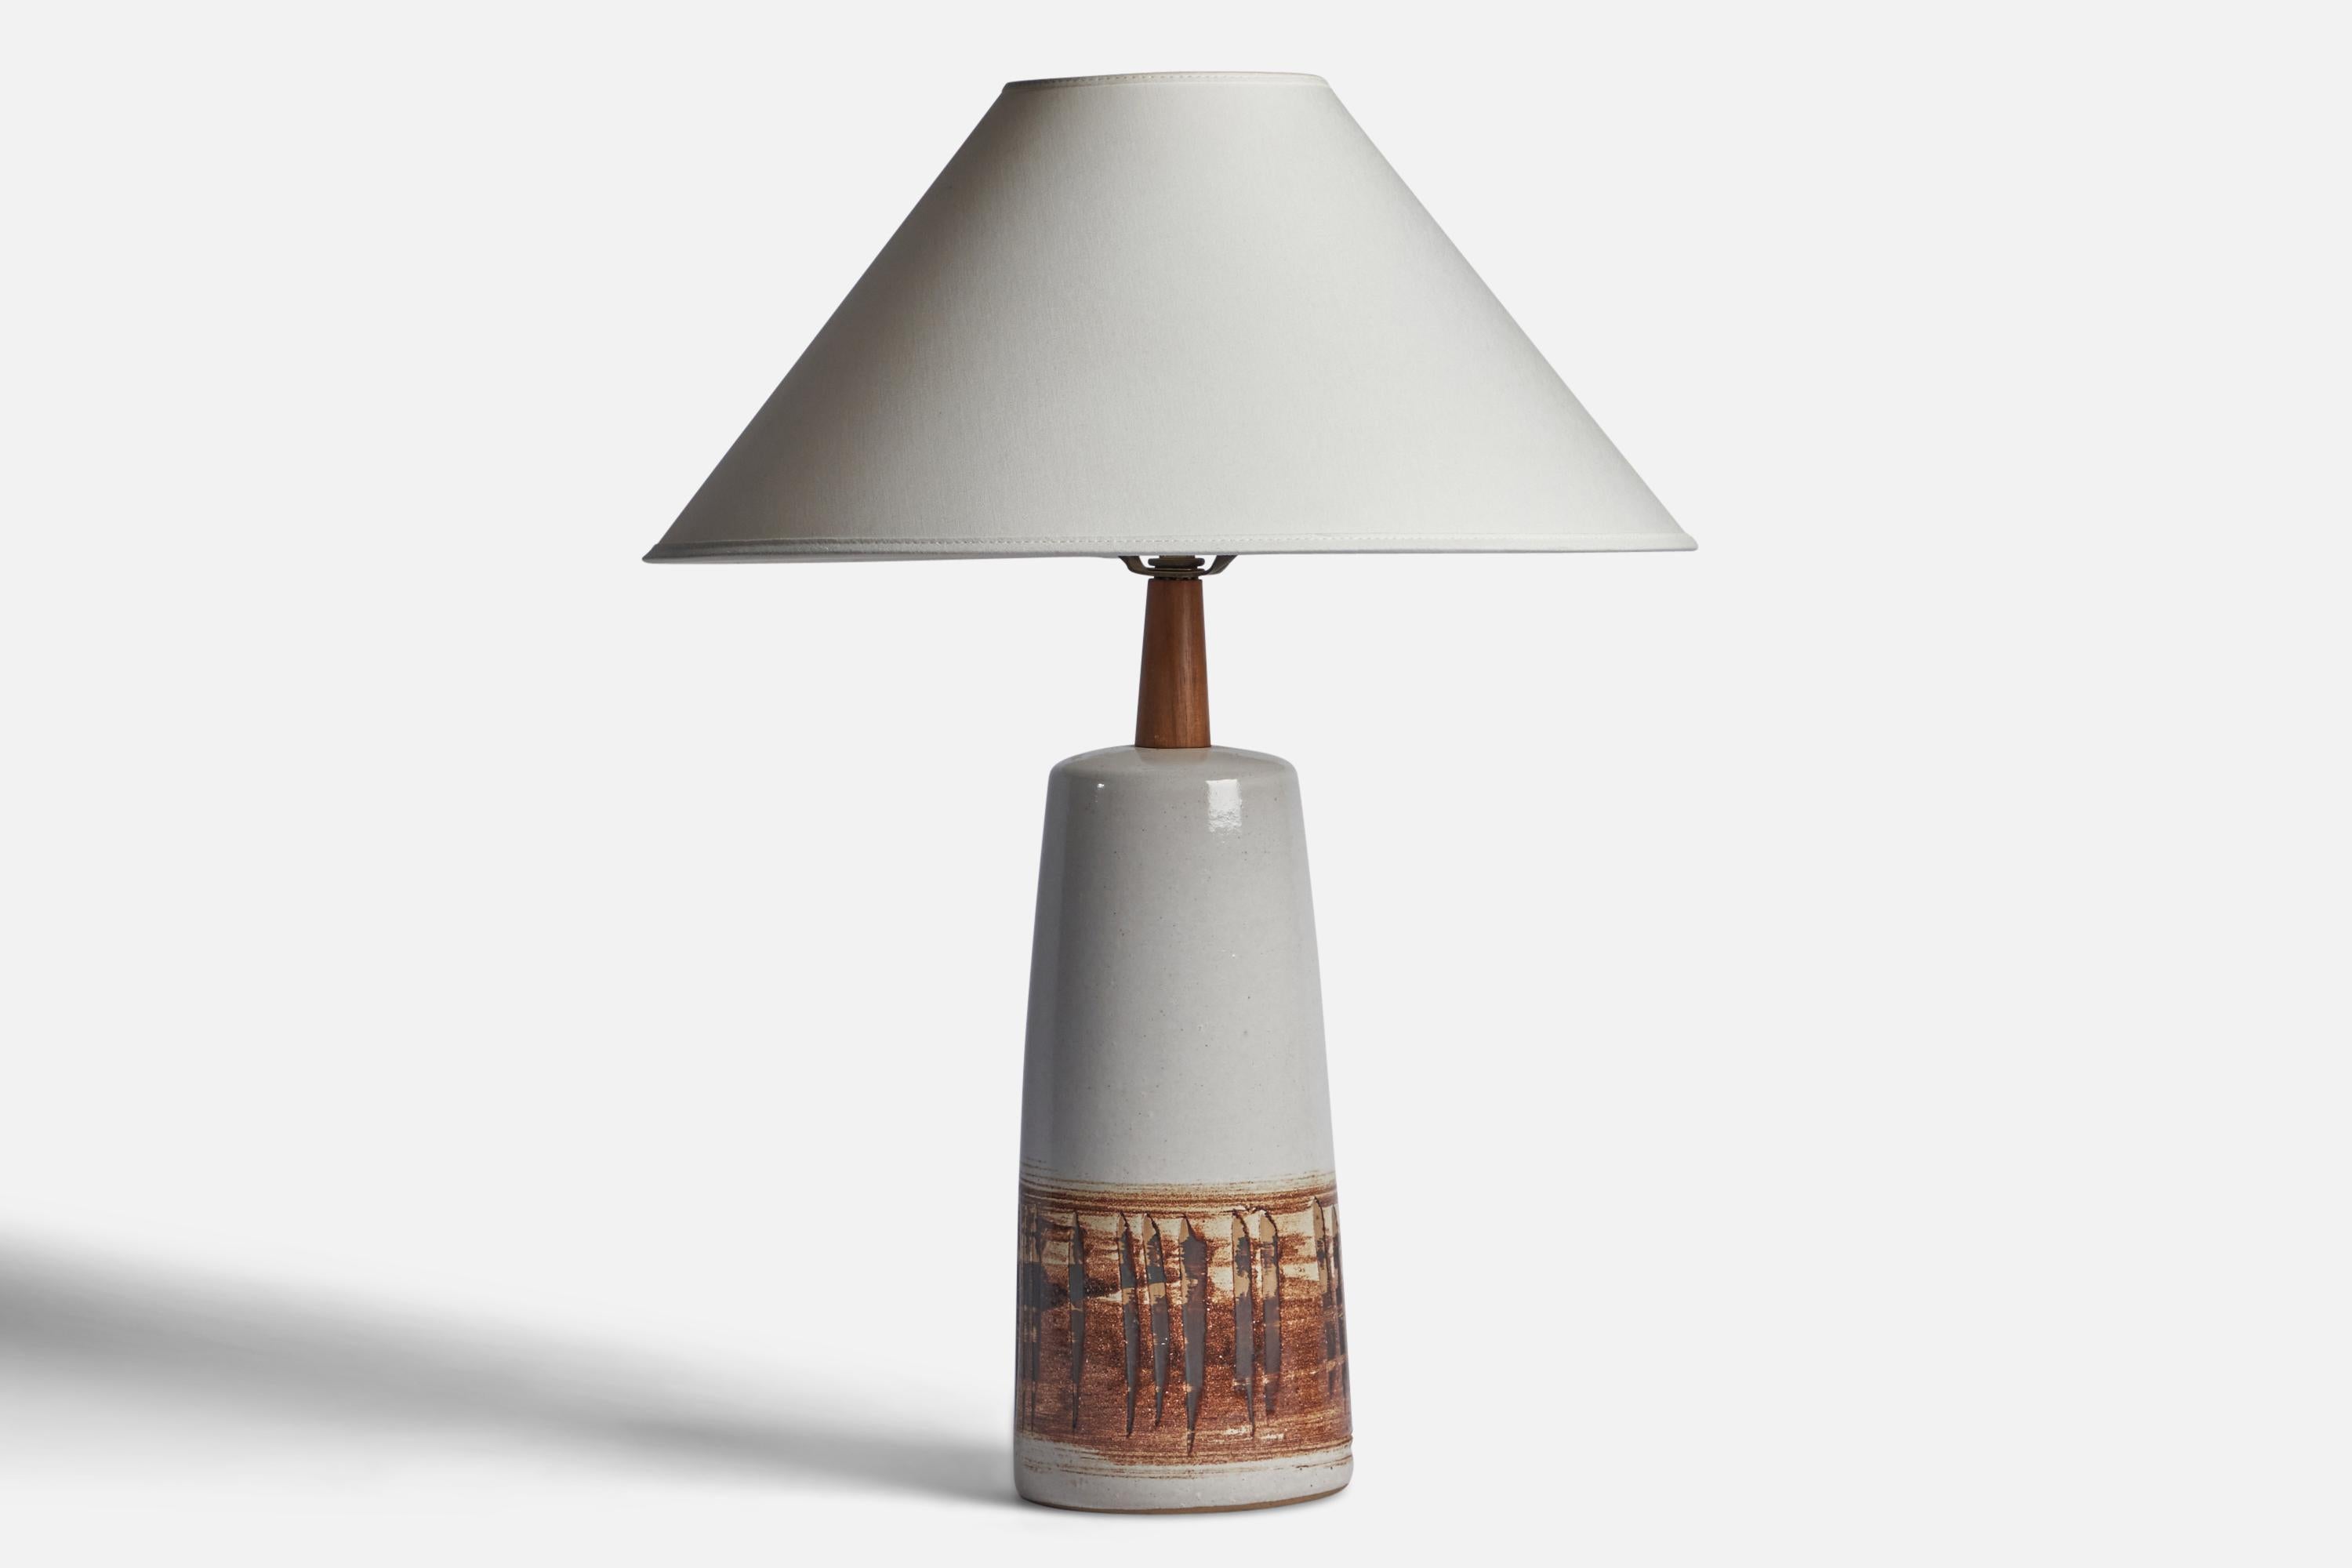 An off-white and brown-glazed ceramic and walnut table lamp designed by Jane & Gordon Martz and produced by Marshall Studios, USA, 1960s.

Dimensions of Lamp (inches): 16.75” H x 5.2” Diameter
Dimensions of Shade (inches): 4.5” Top Diameter x 16”